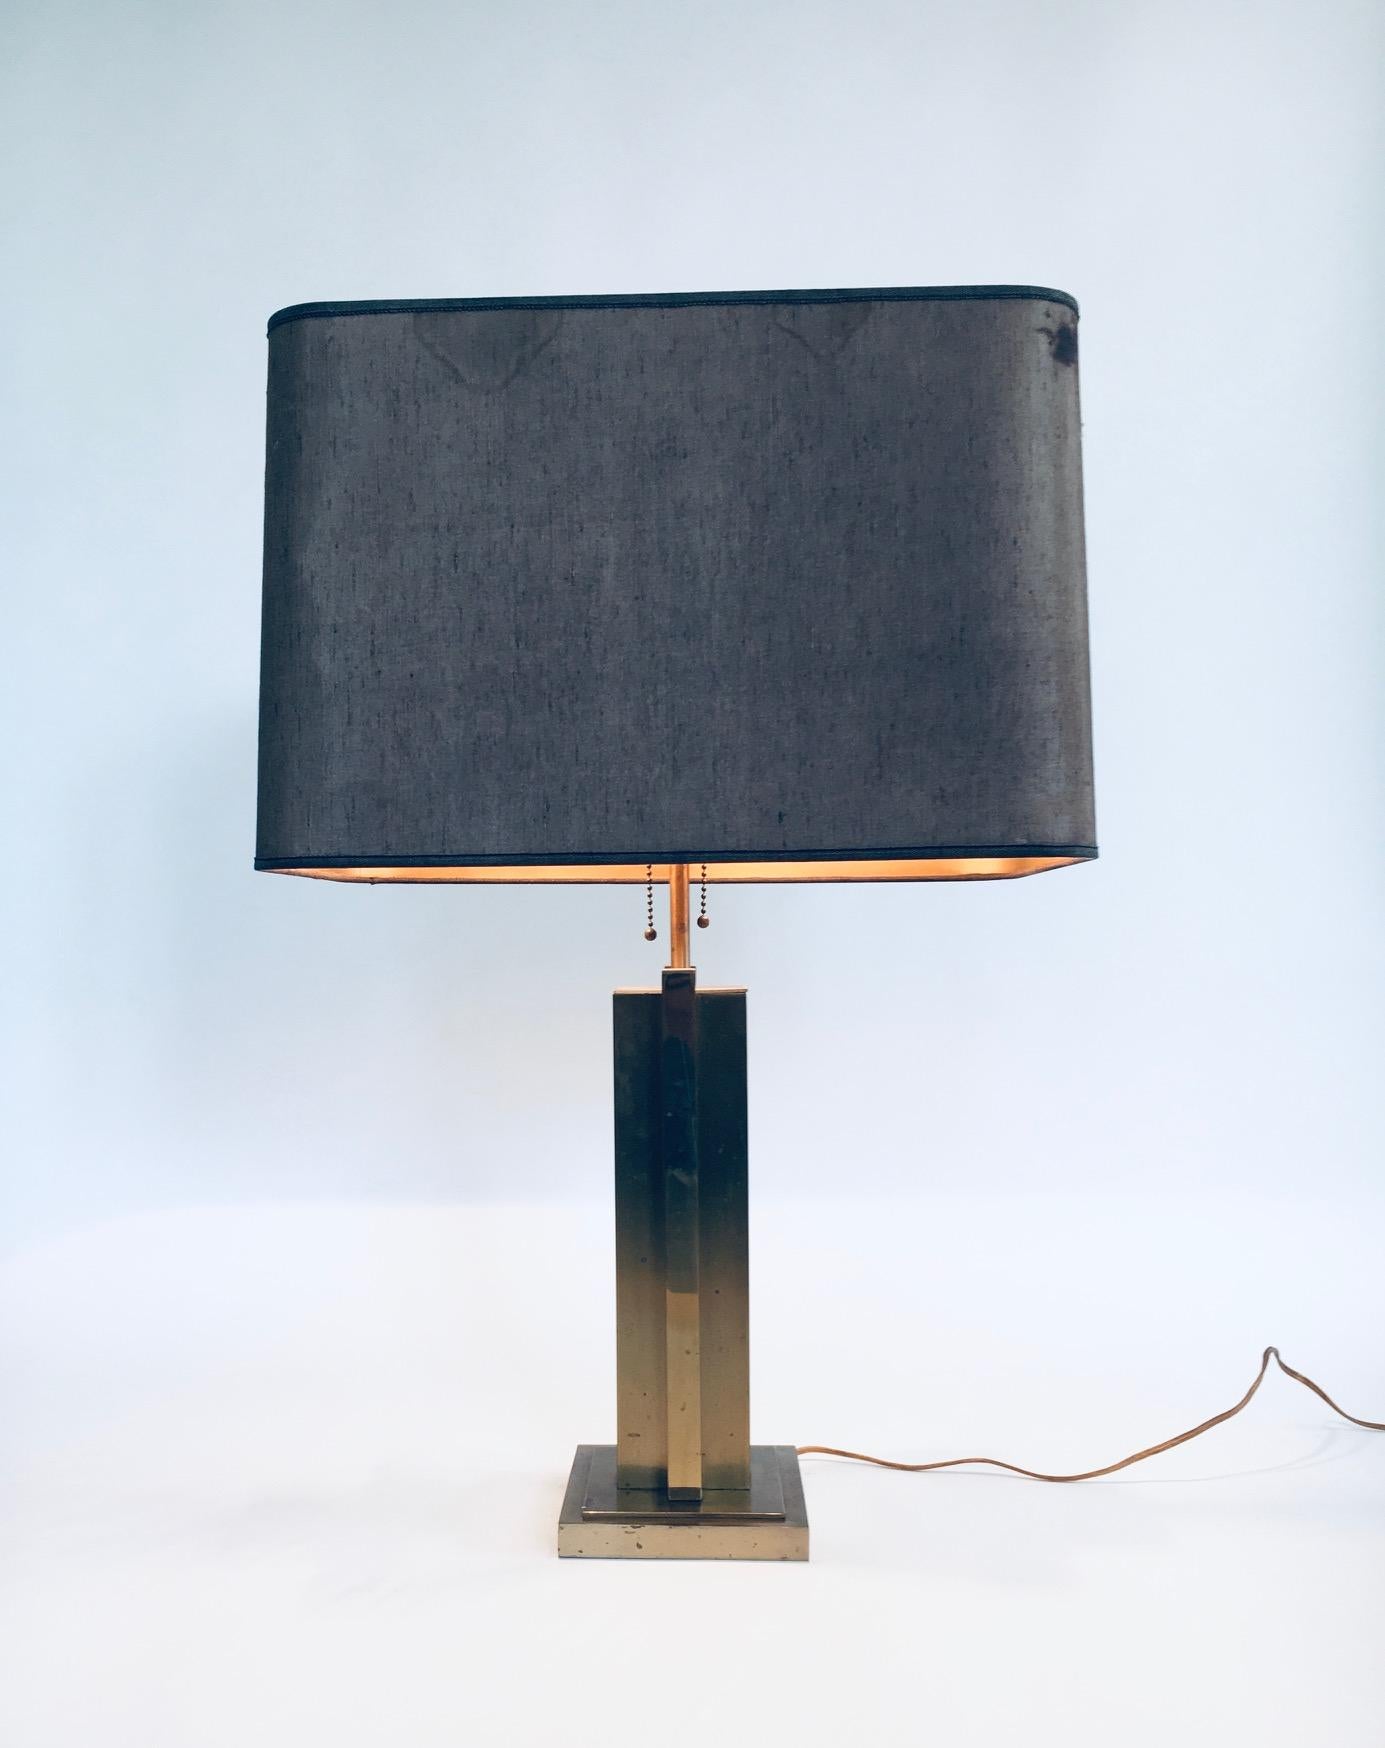 European 1970's Postmodern Design Brass Architectural Table Lamp For Sale